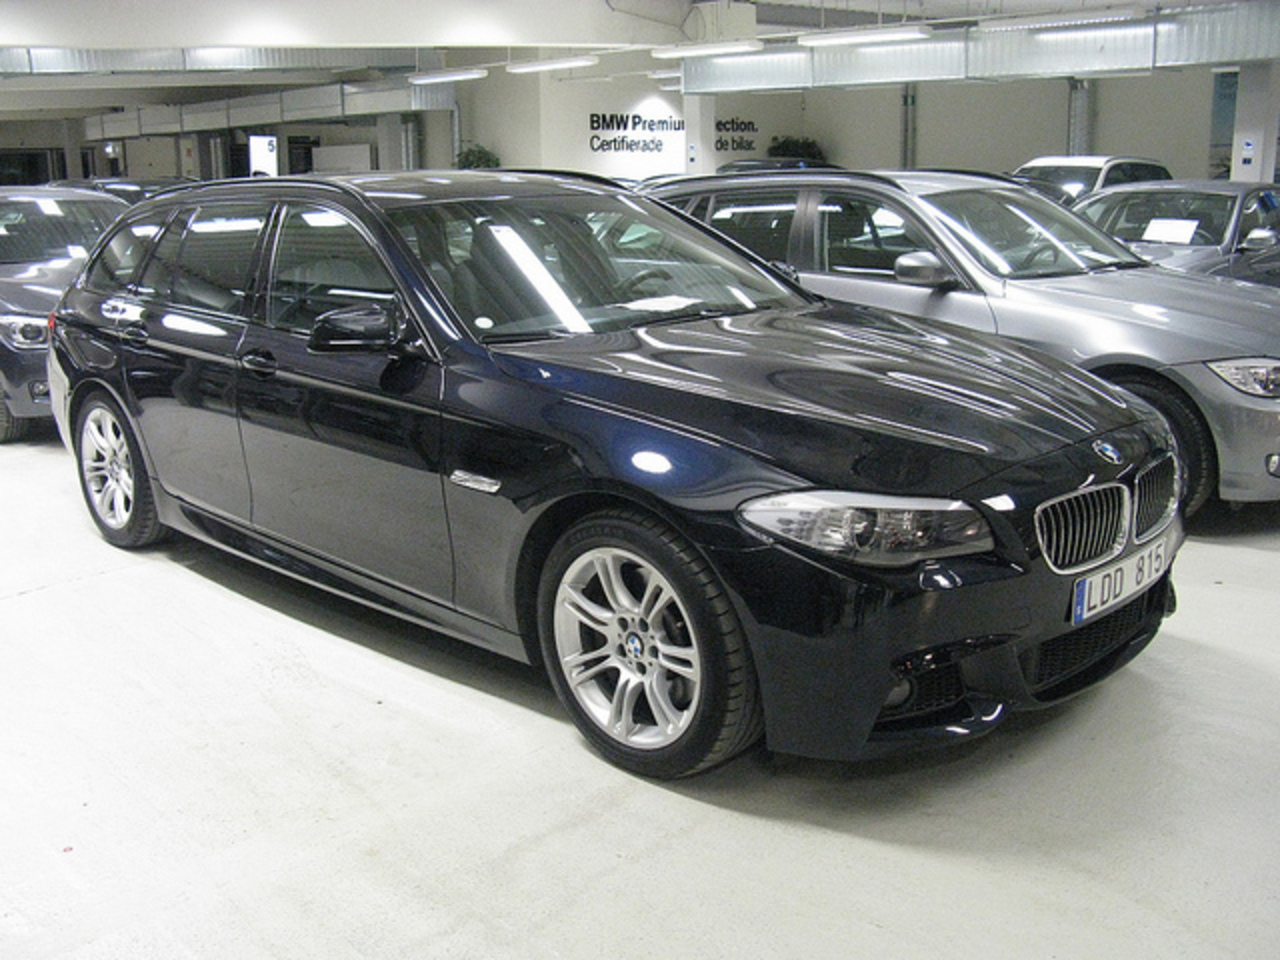 BMW 530d Touring M Sport F11 | Flickr - Photo Sharing!